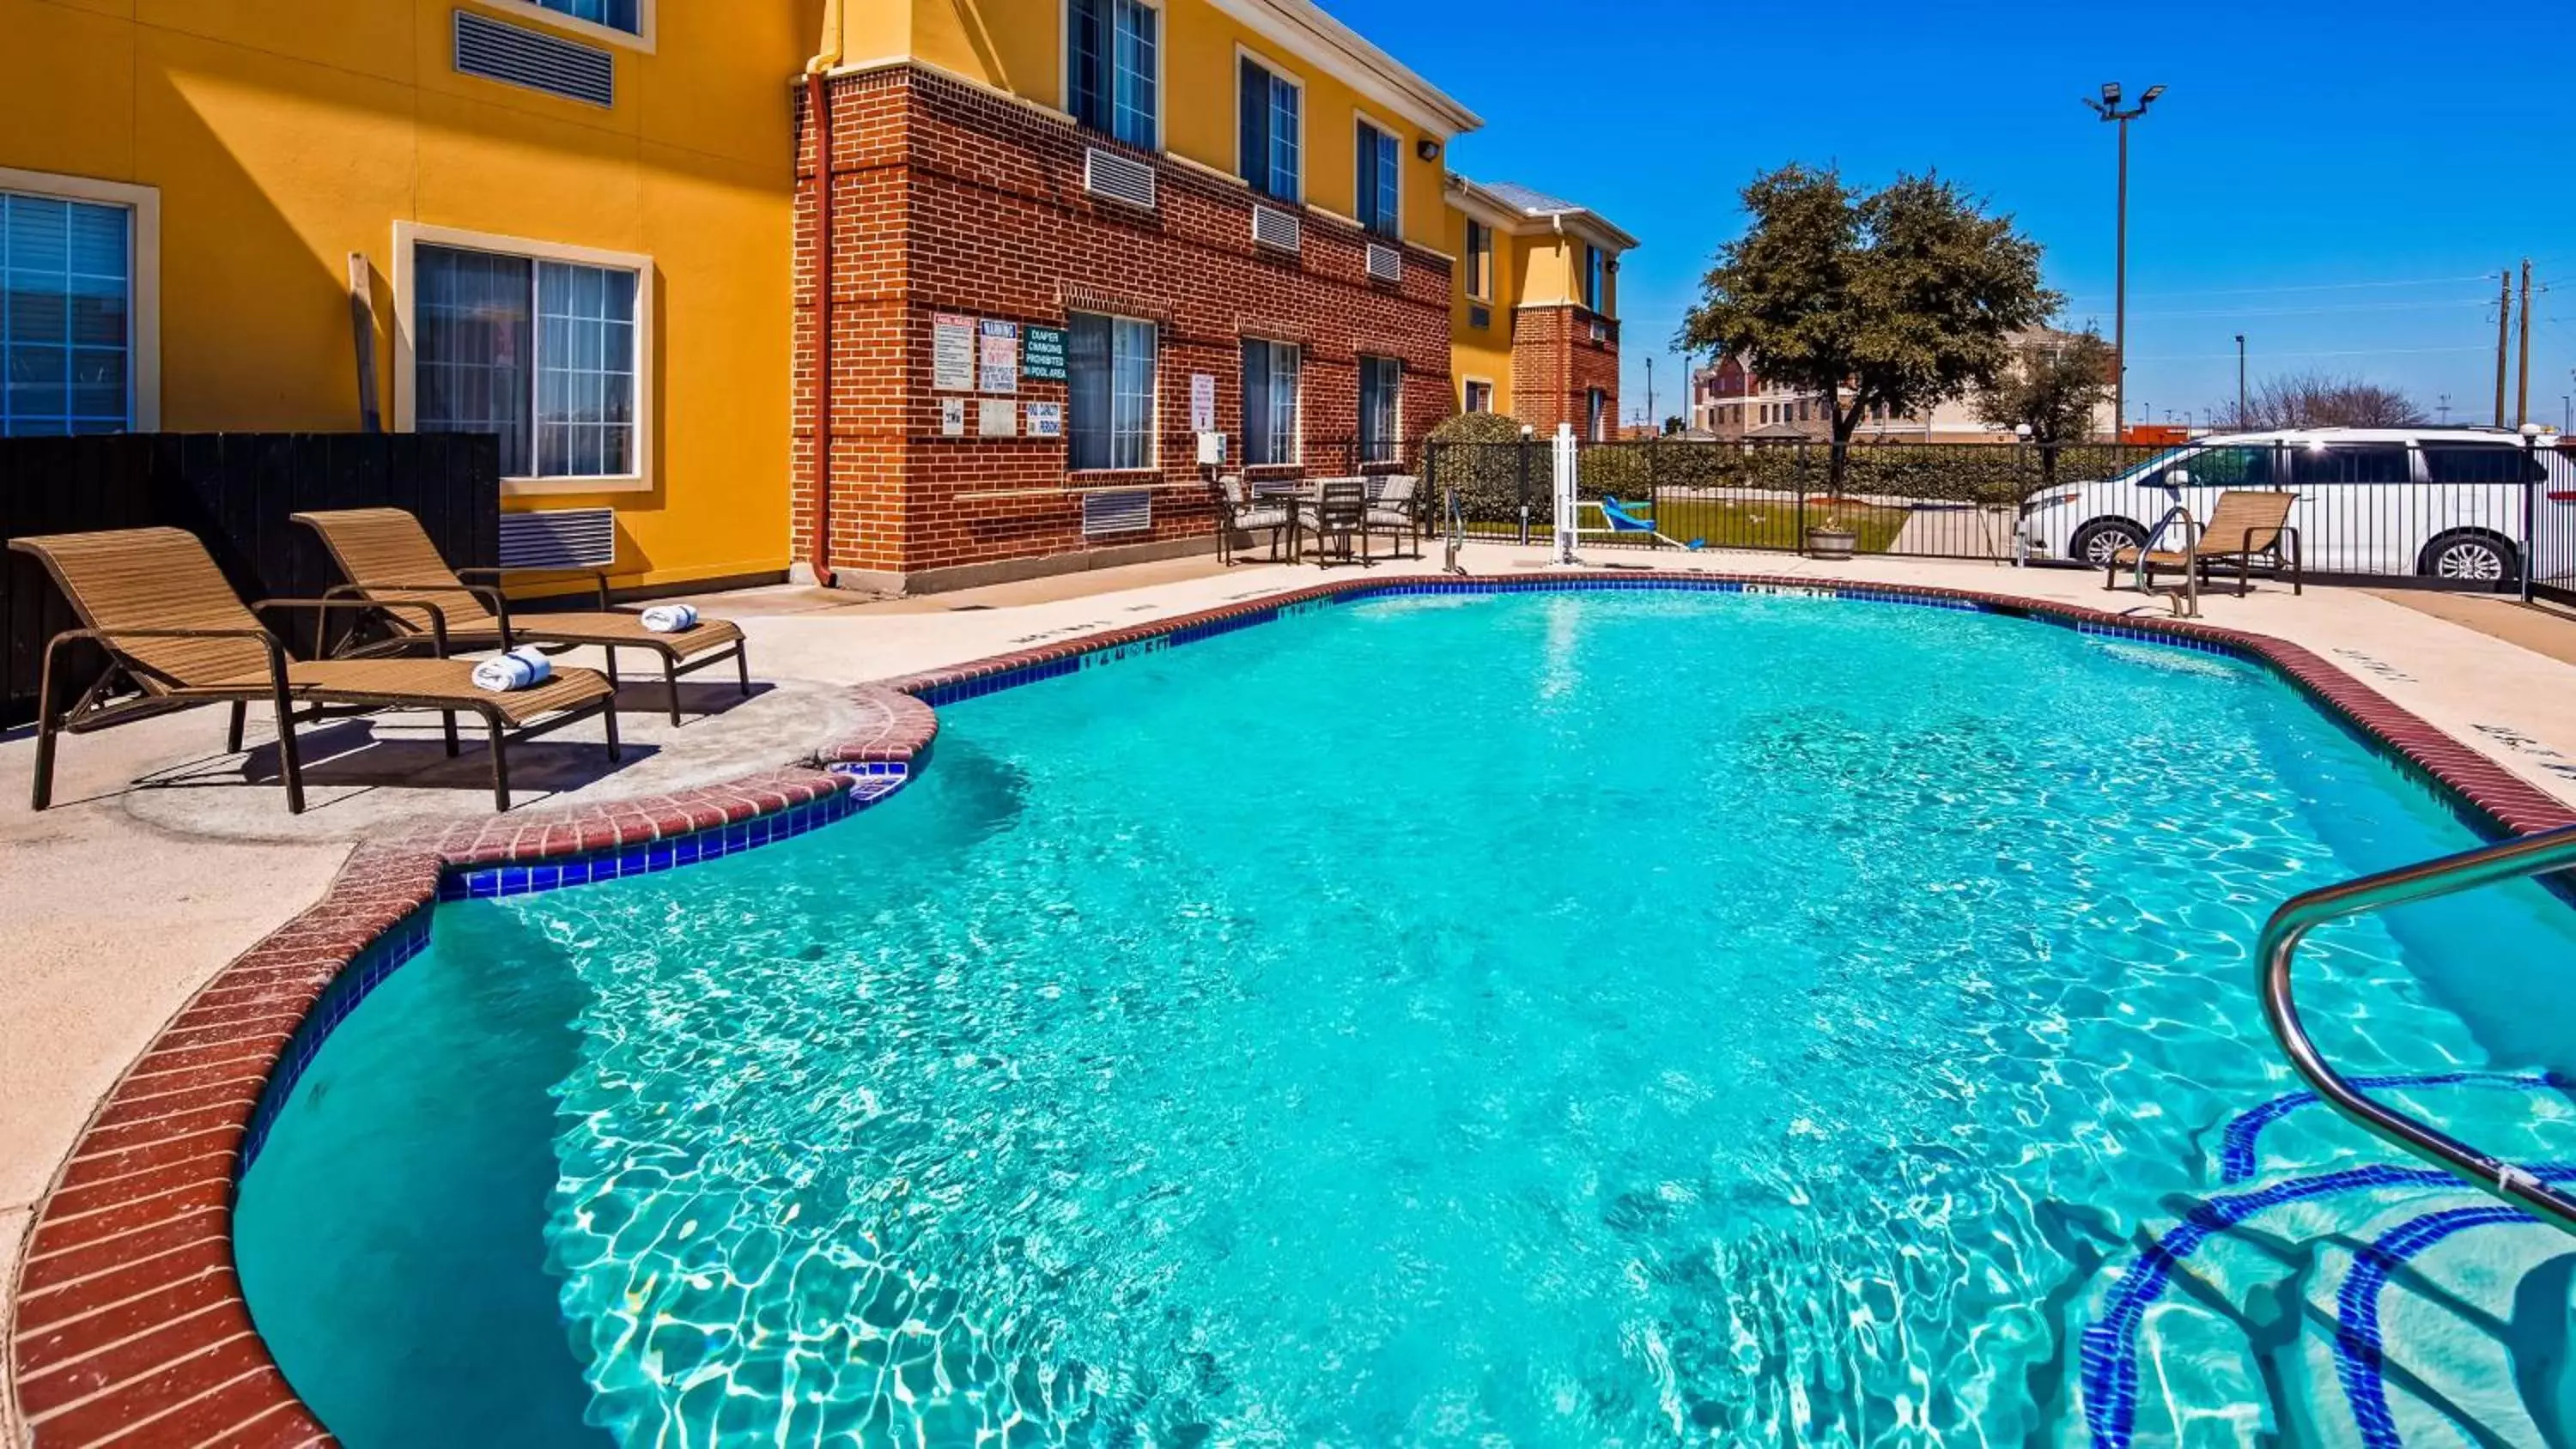 On site, Swimming Pool in Best Western Fort Worth Inn and Suites